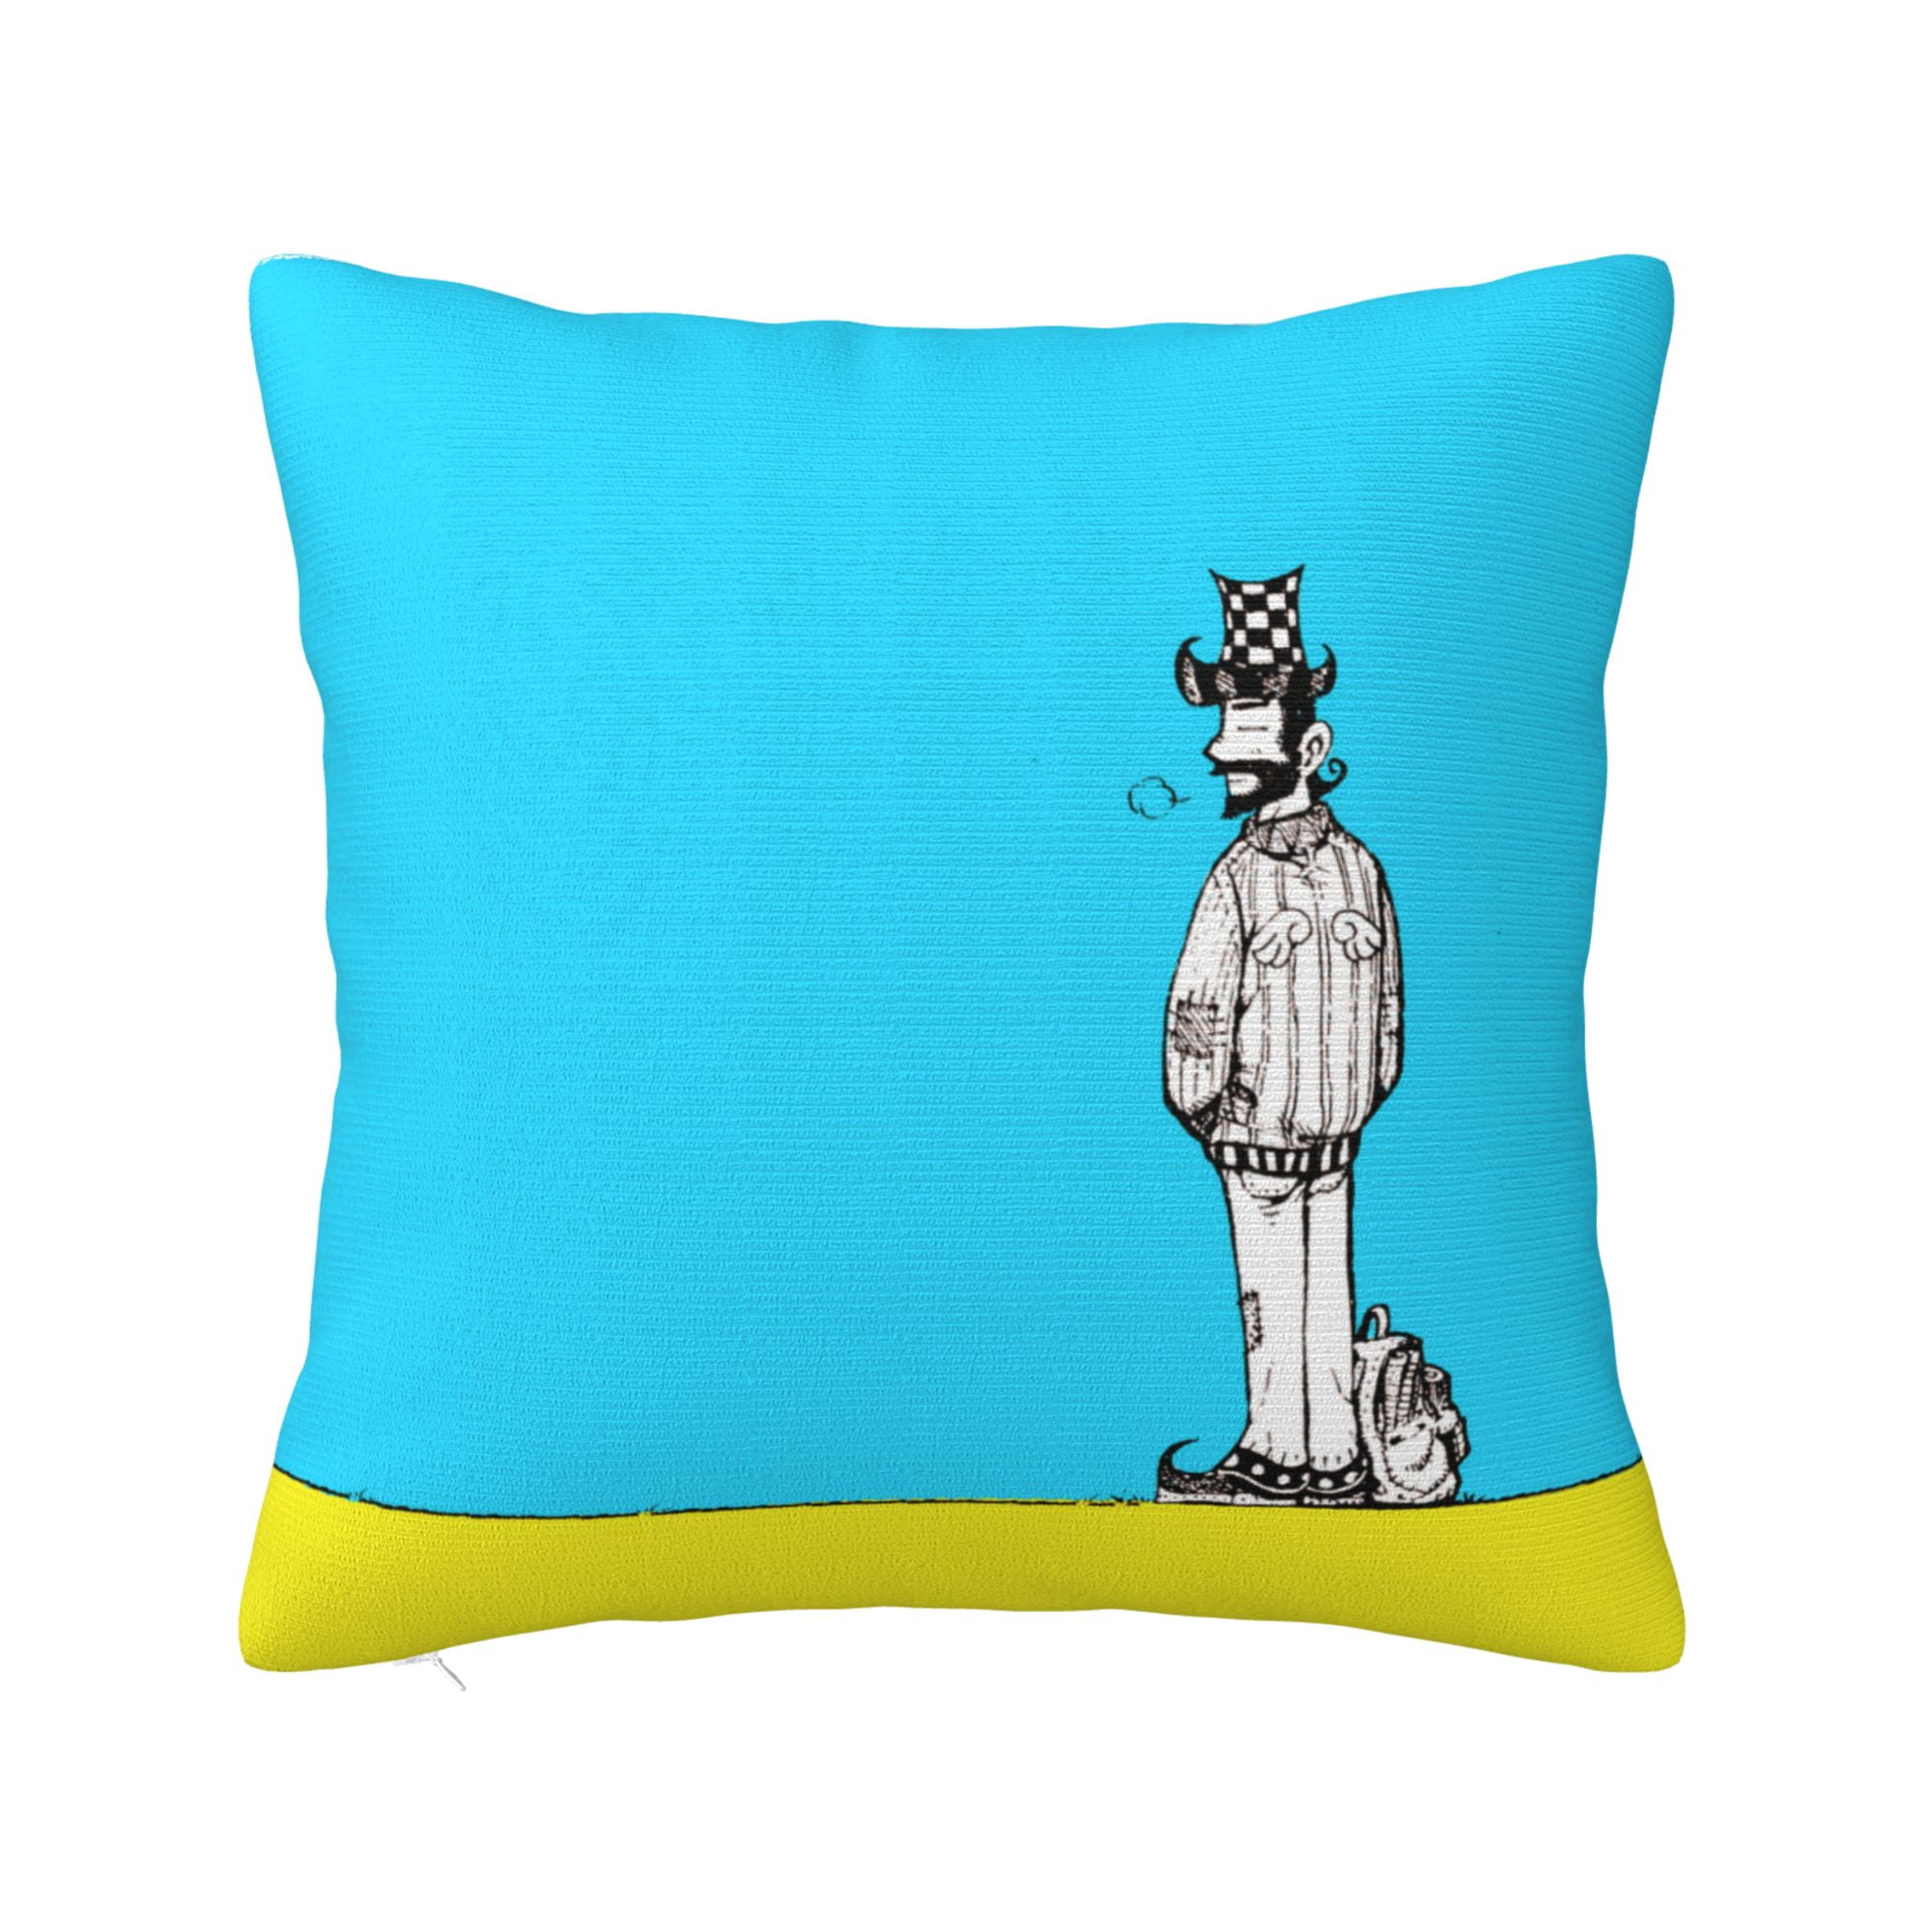 ZICANCN Funny Funny Cat Decorative Throw Pillow Covers, Bed Couch Sofa  Decorative Knit Pillow Covers for Living Room Farmhouse 26x26